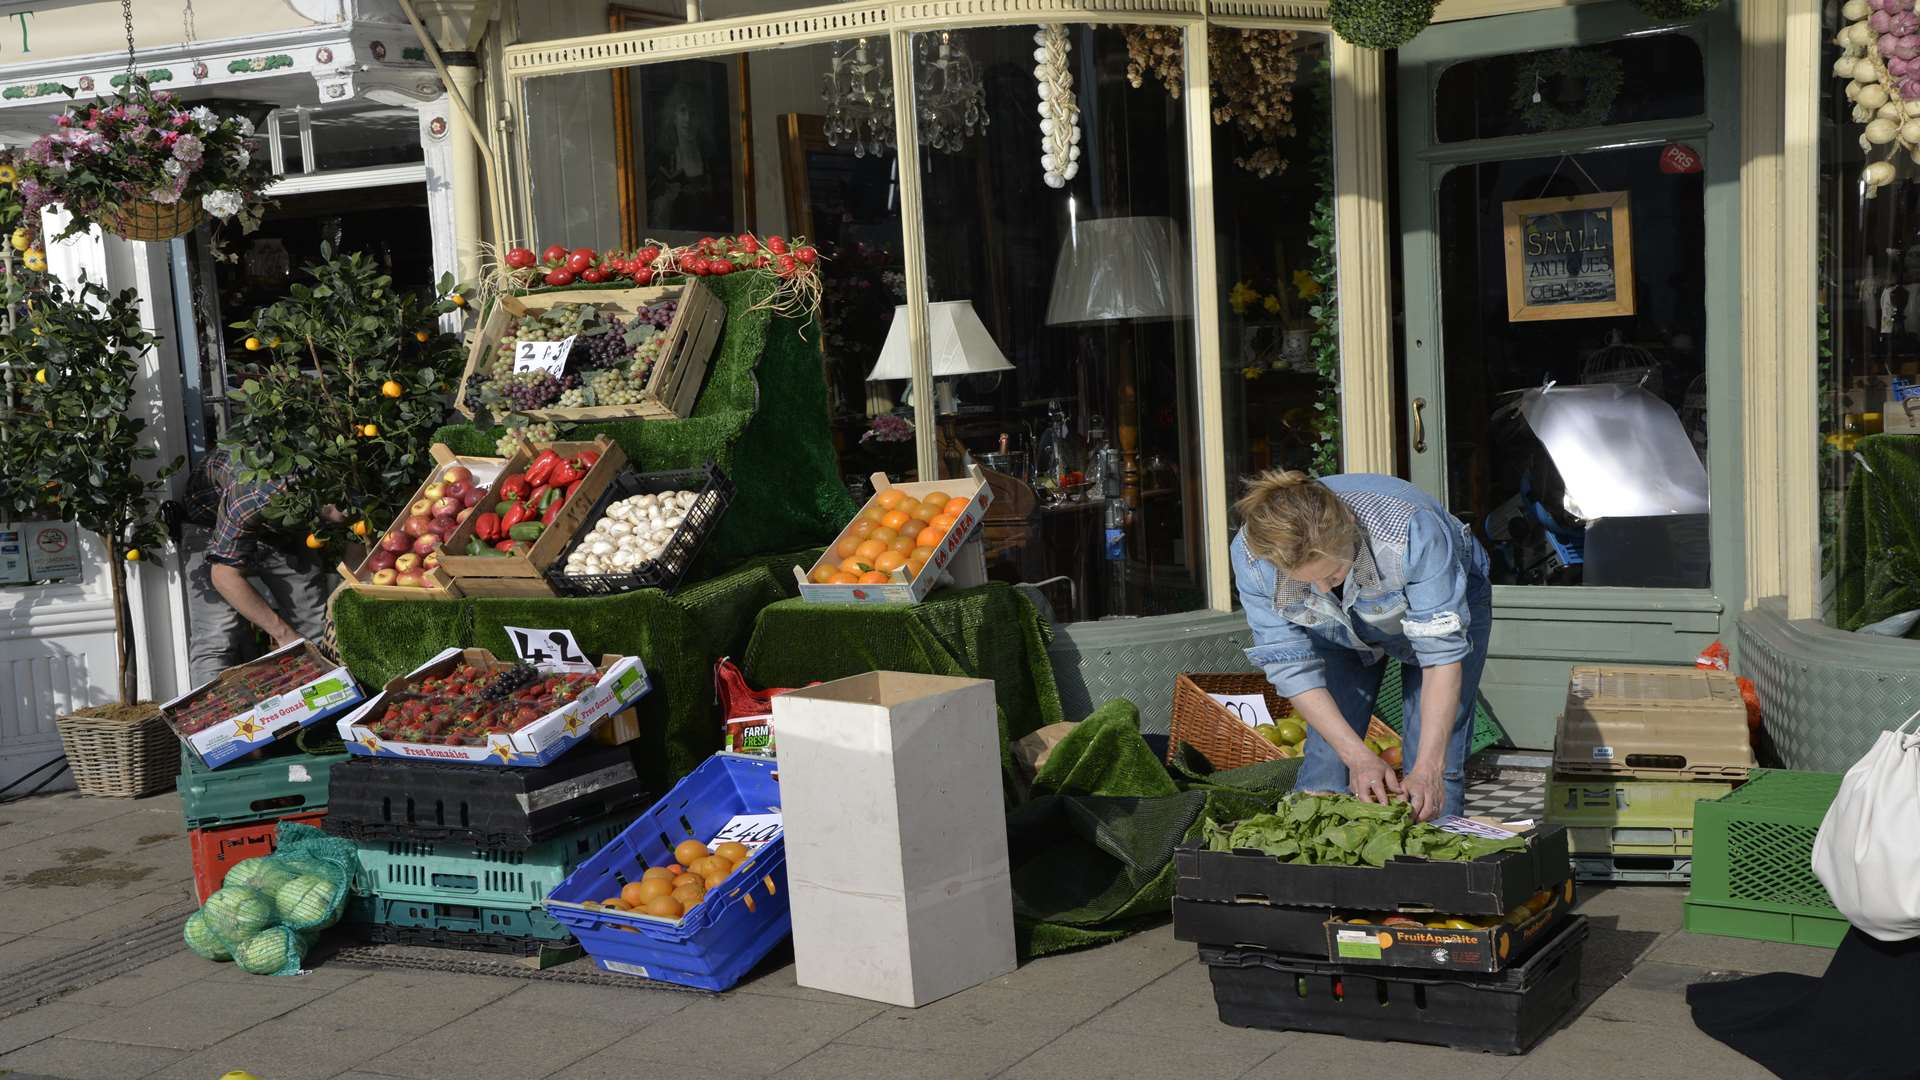 A fruit and veg shop prepped for filming